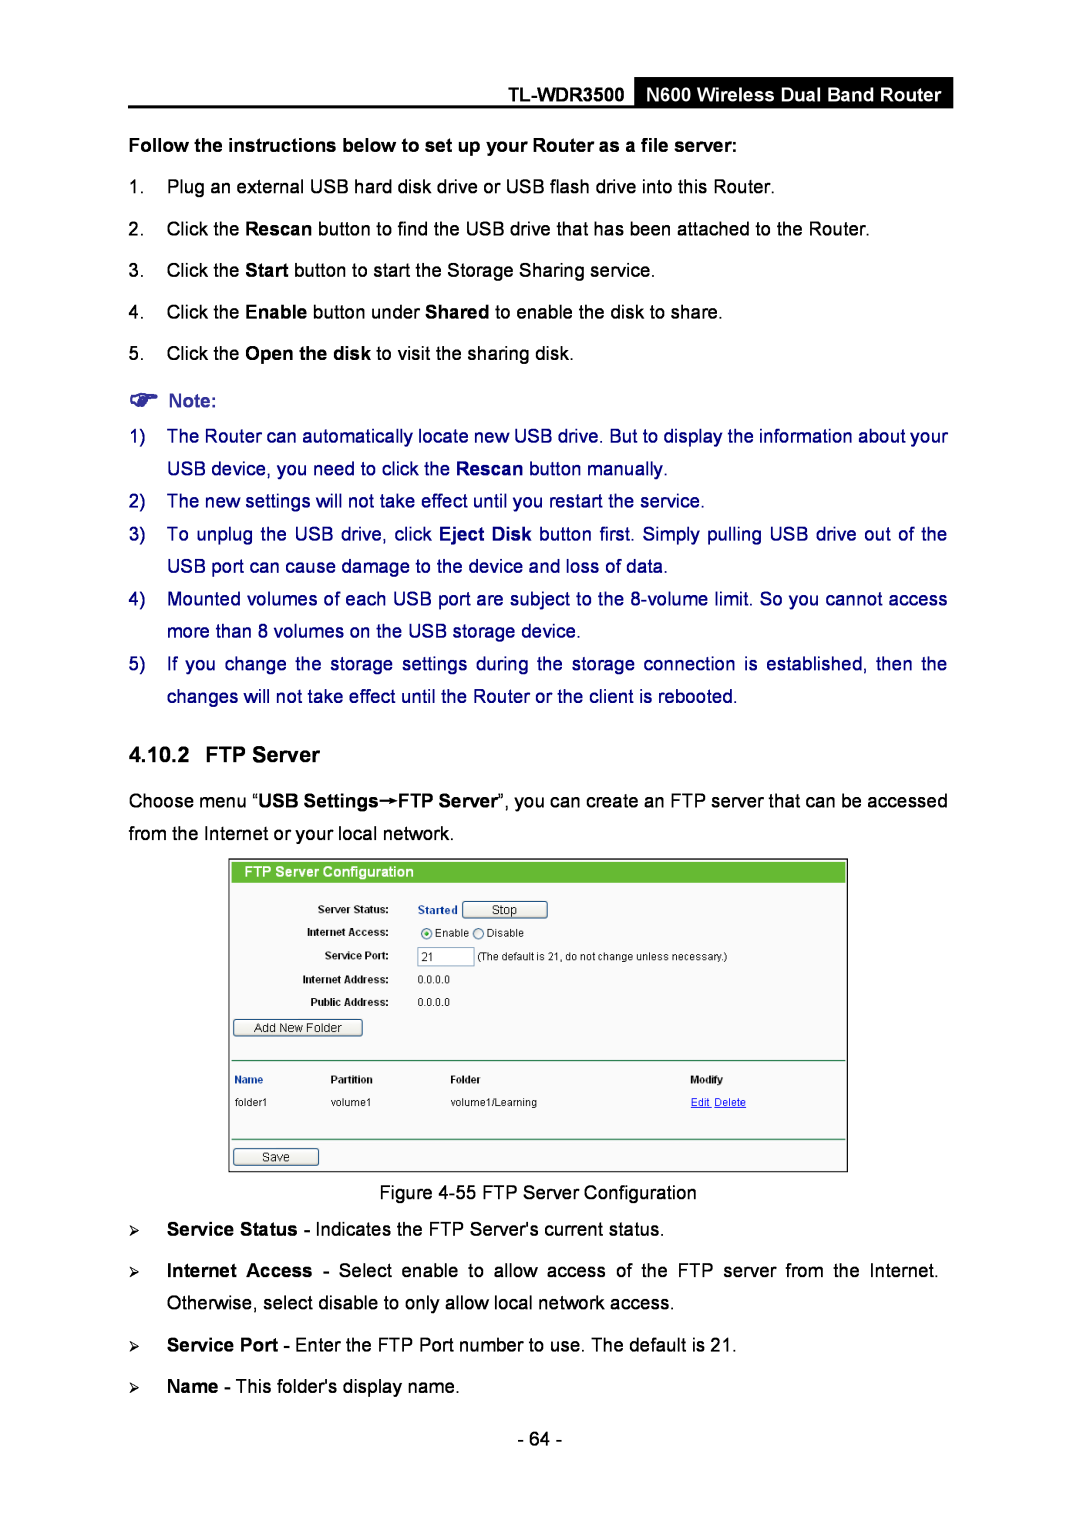 TP-Link TL-WDR3500 manual FTP Server, Follow the instructions below to set up your Router as a file server,  Note 